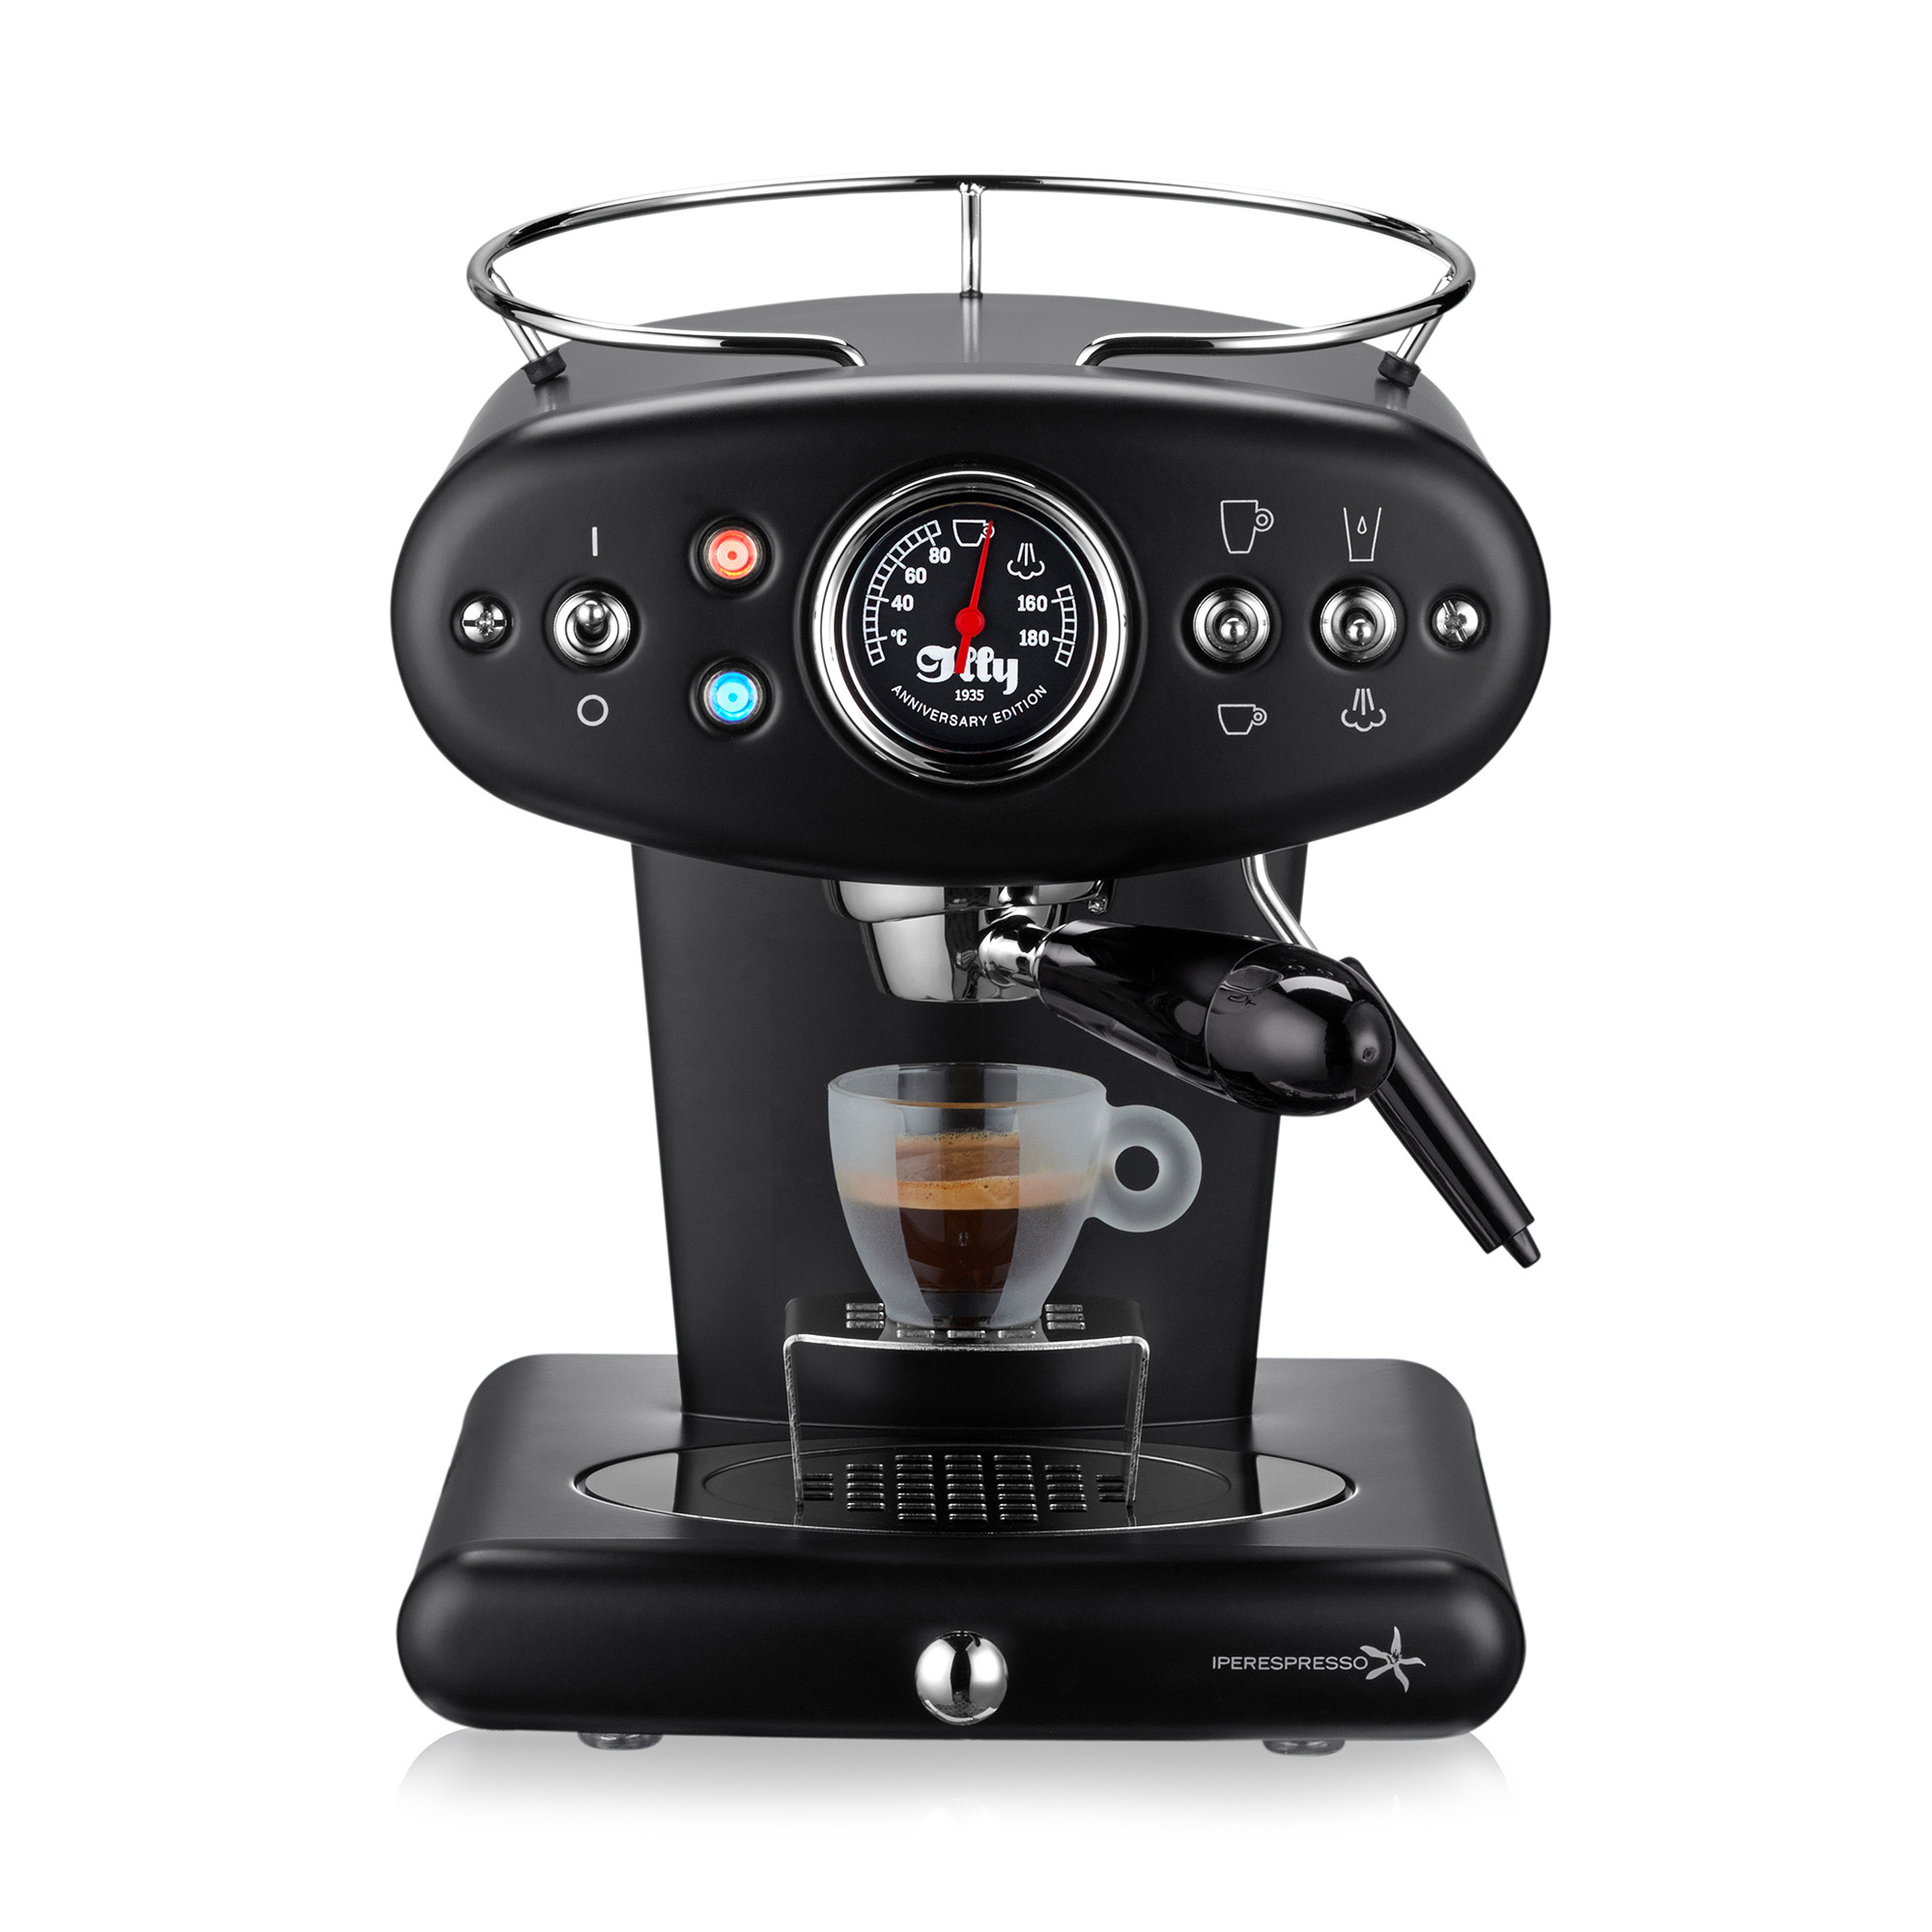 https://www.illy.com/on/demandware.static/-/Sites-masterCatalog_illycaffe/default/dw39b65a26/products/Coffee-Machines/360images/60248_X1-ANNIVERSARY-black/IMG_01.jpg